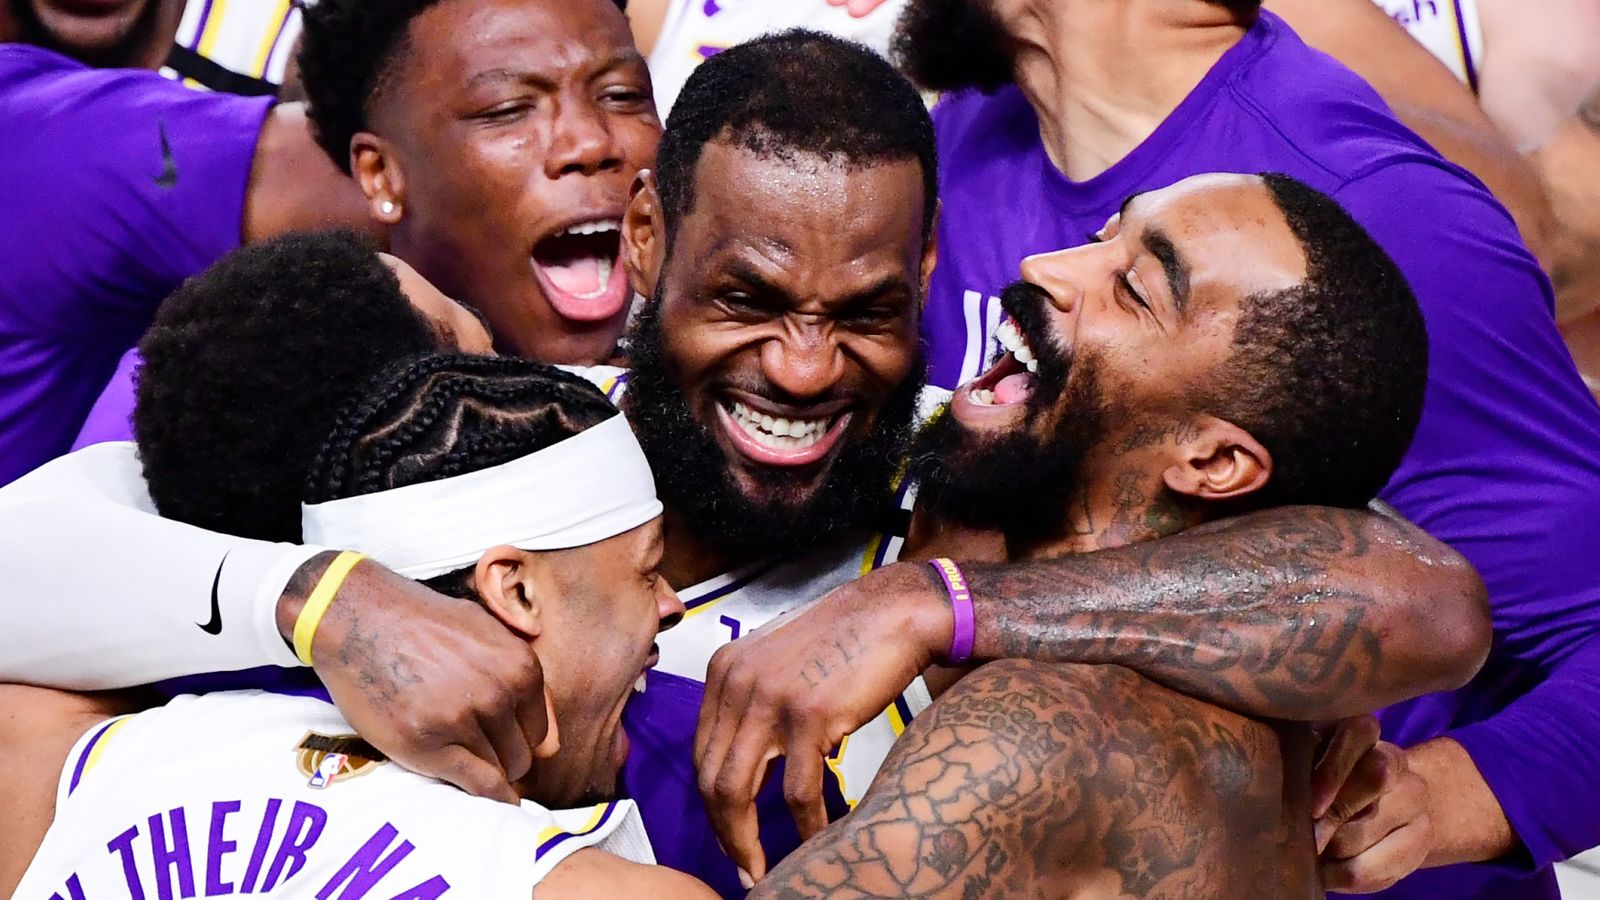 Lakers Win 2020 NBA Championship! An Ending Worth The Entire Journey